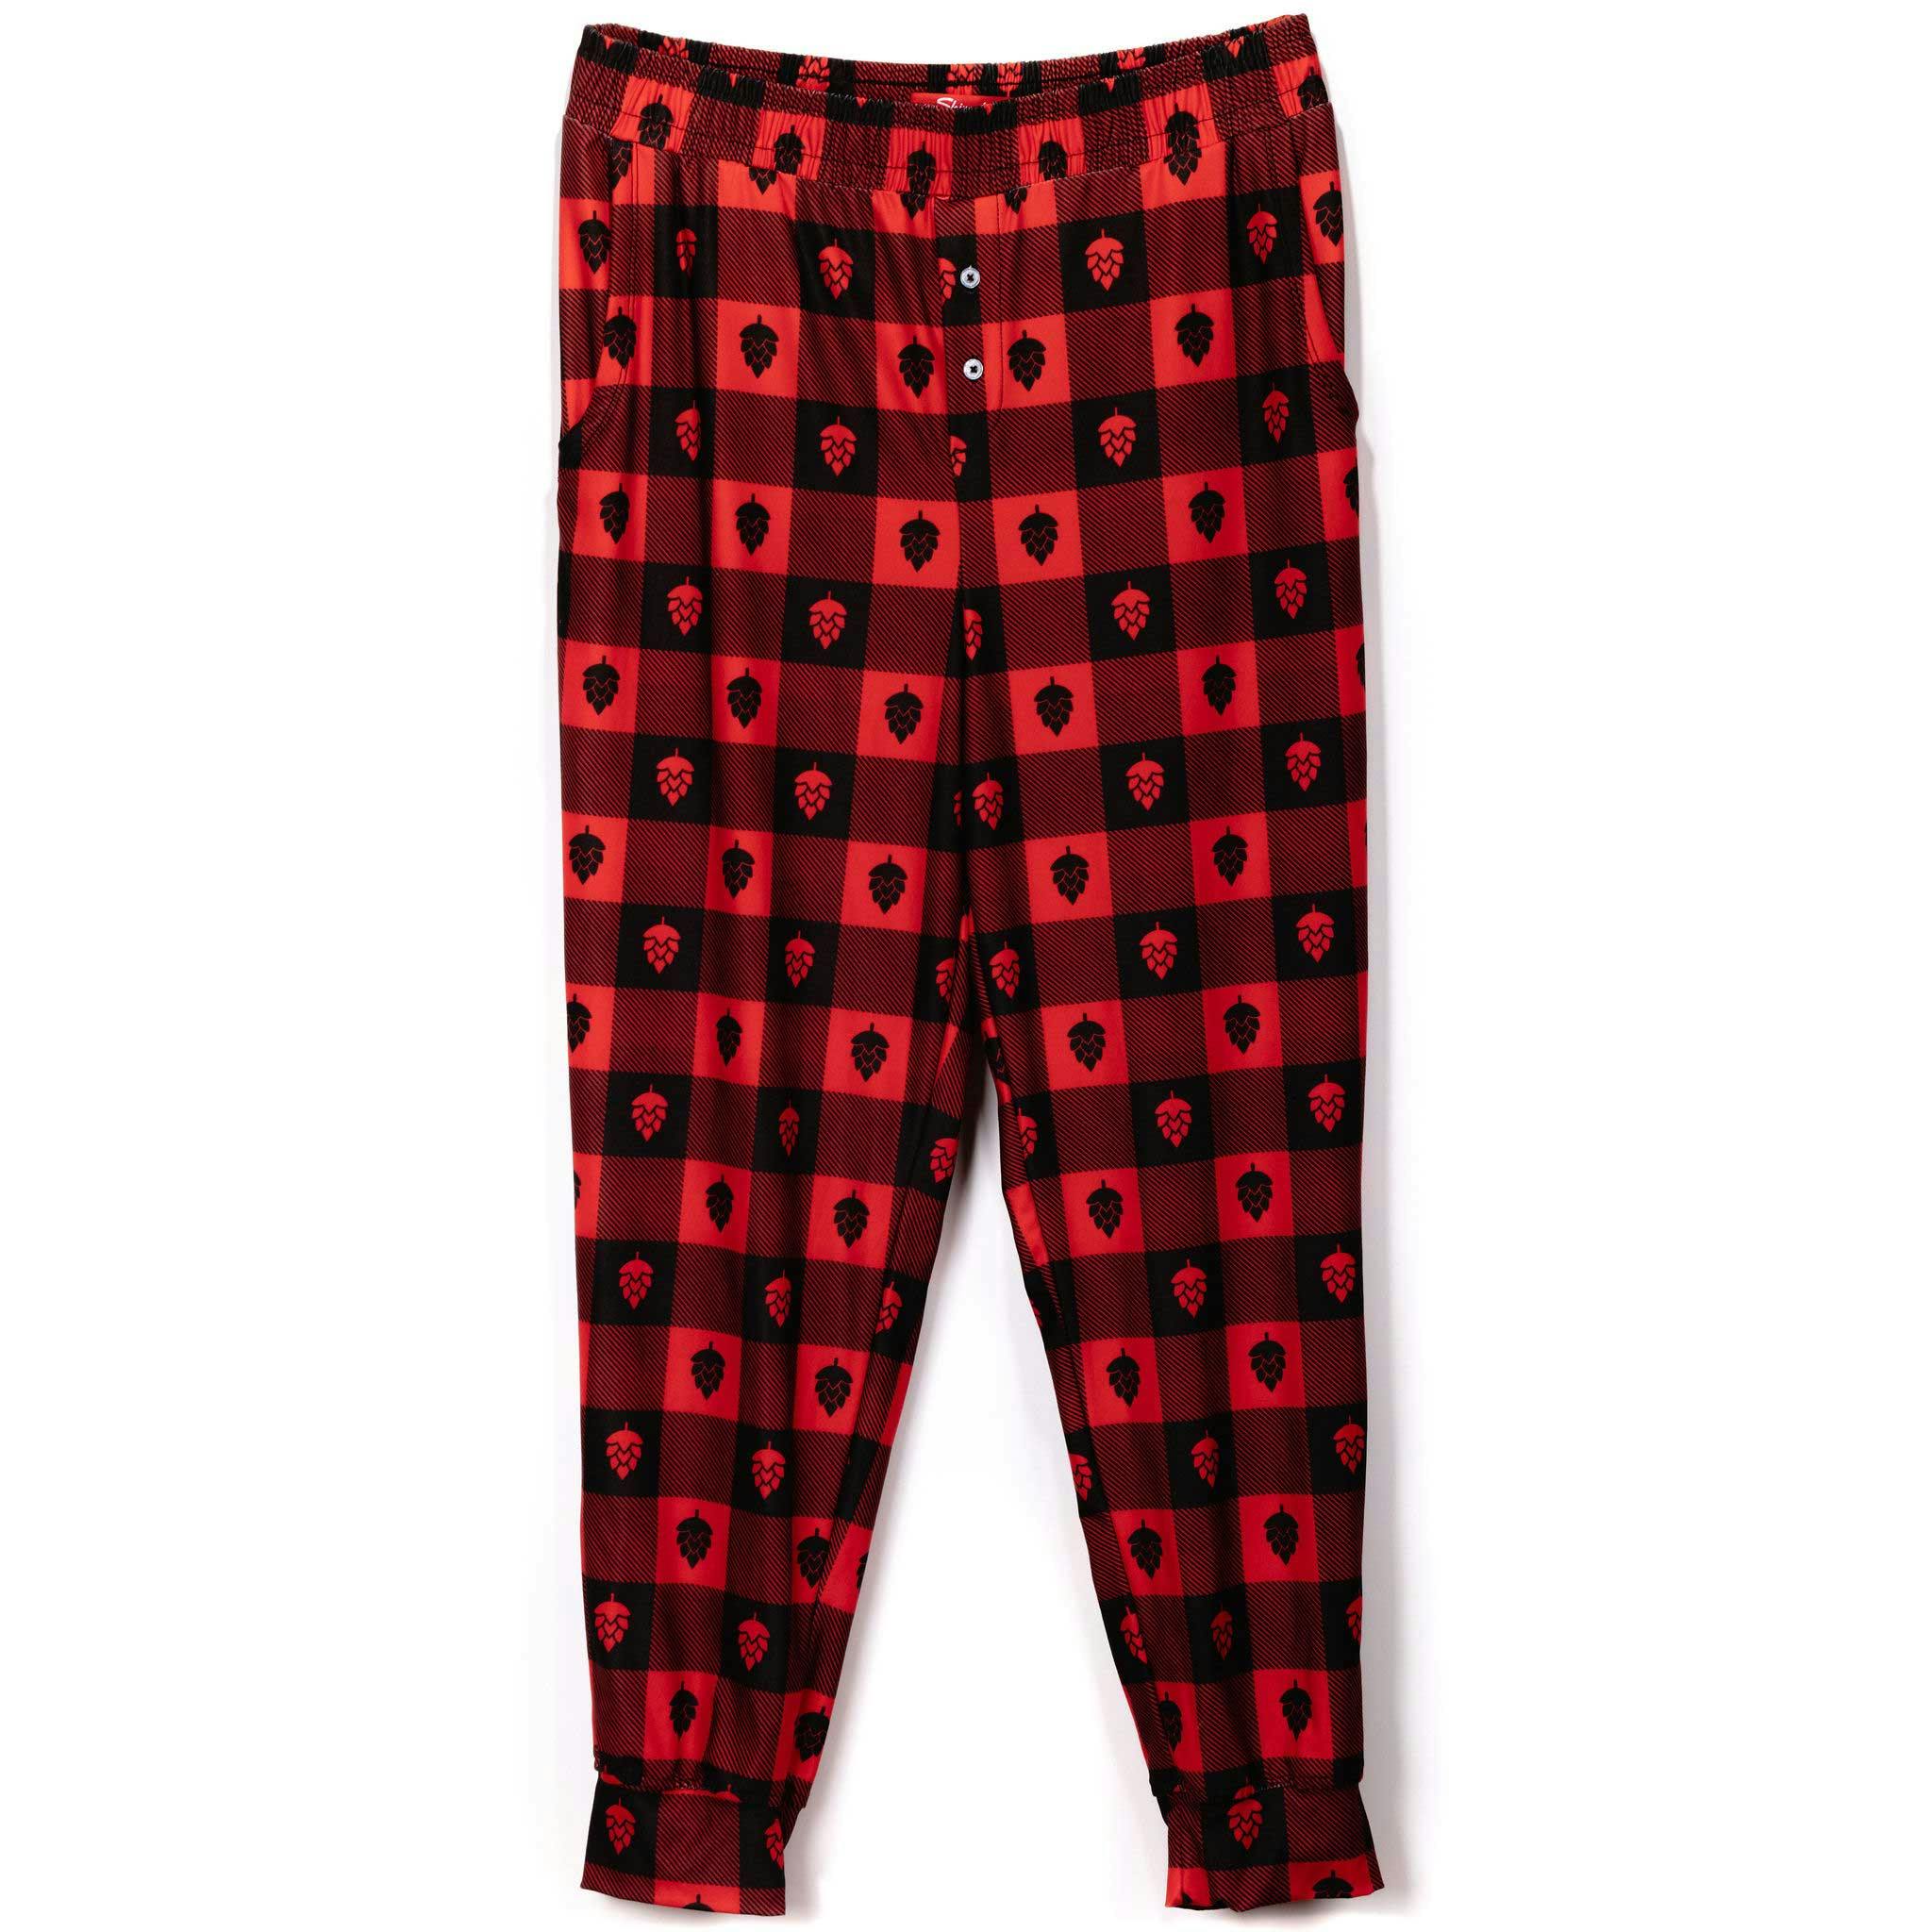 Front view of the Sierra Nevada red pajama bottoms with a hop pattern